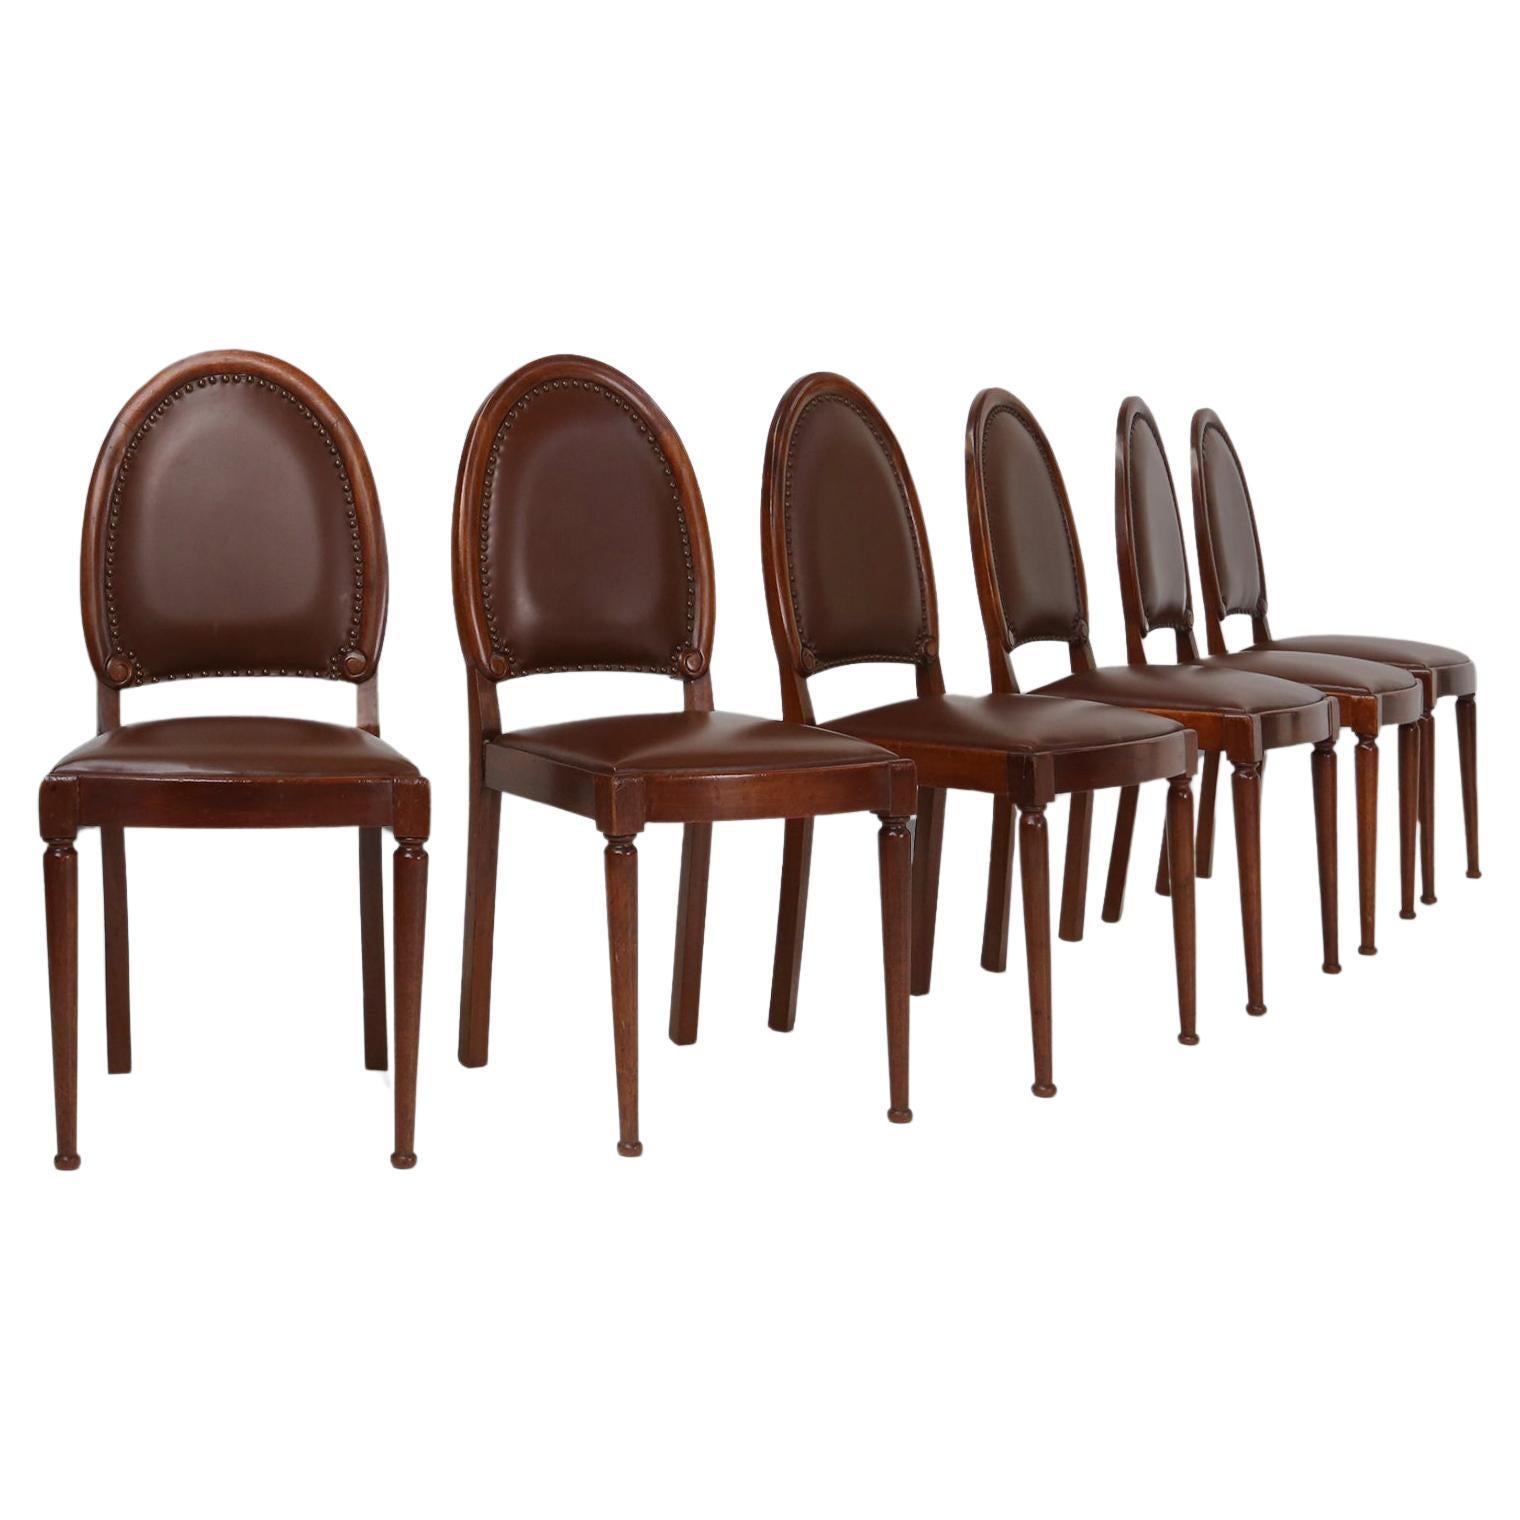 Art Deco set of six chairs by De Coene 1930 For Sale